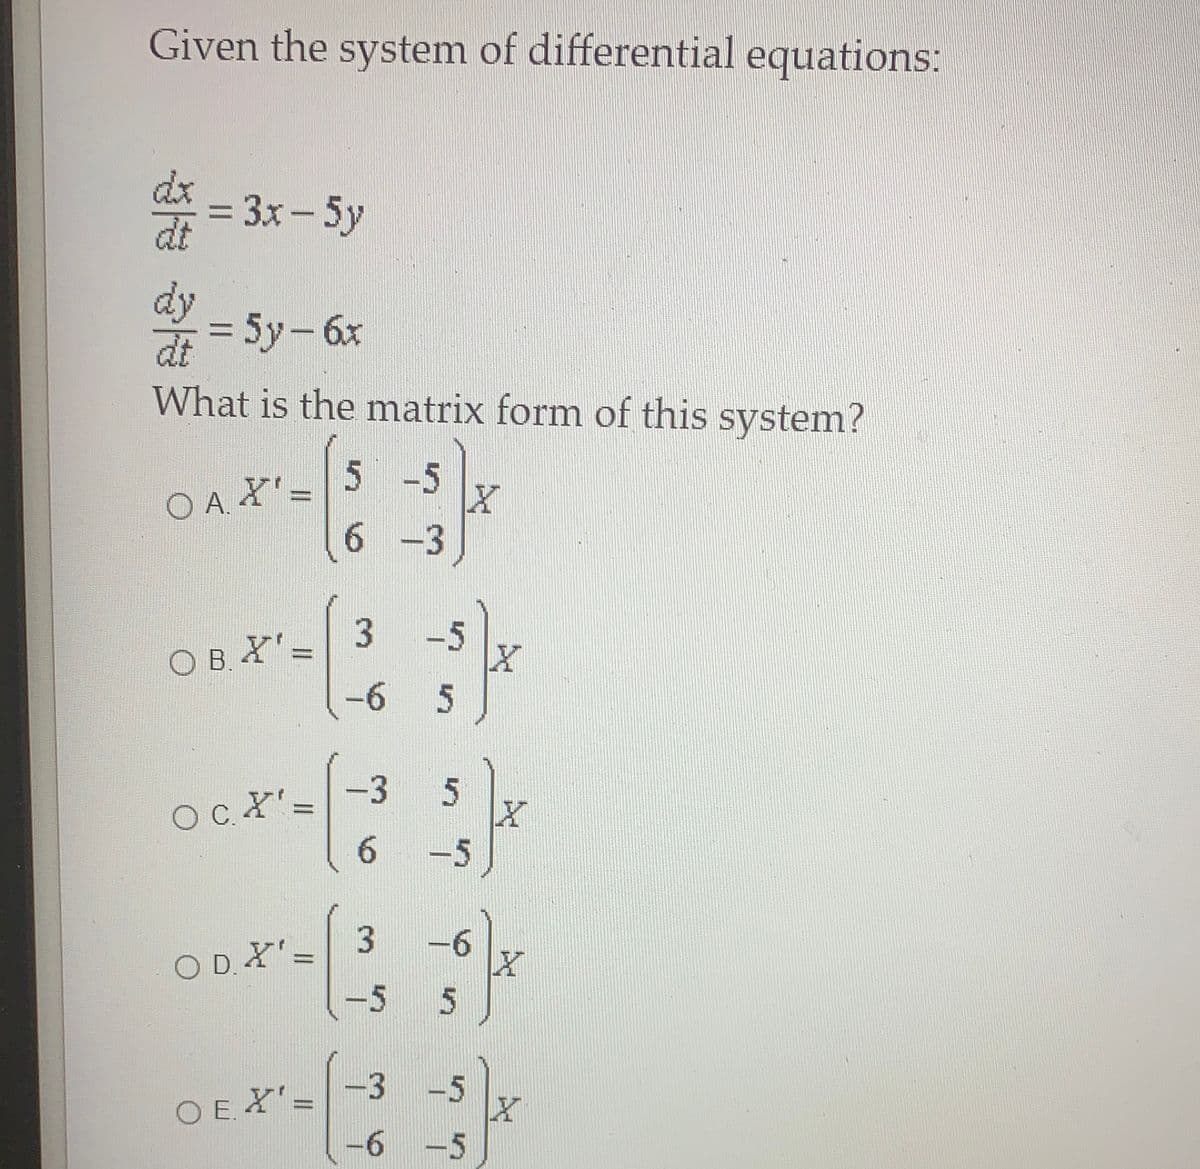 Given the system of differential equations:
= 3x - 5y
%3D
dy
= 5y-6x
%3D
dt
What is the matrix form of this system?
5 -5
O A =
6 -3
-5
O B. X'=
-6
%3D
5
-3
OcX'=
6.
-5
-6
O D. X'=
-5
5n
O E X'=-3 -5
-6 -5
%3D
OE.
